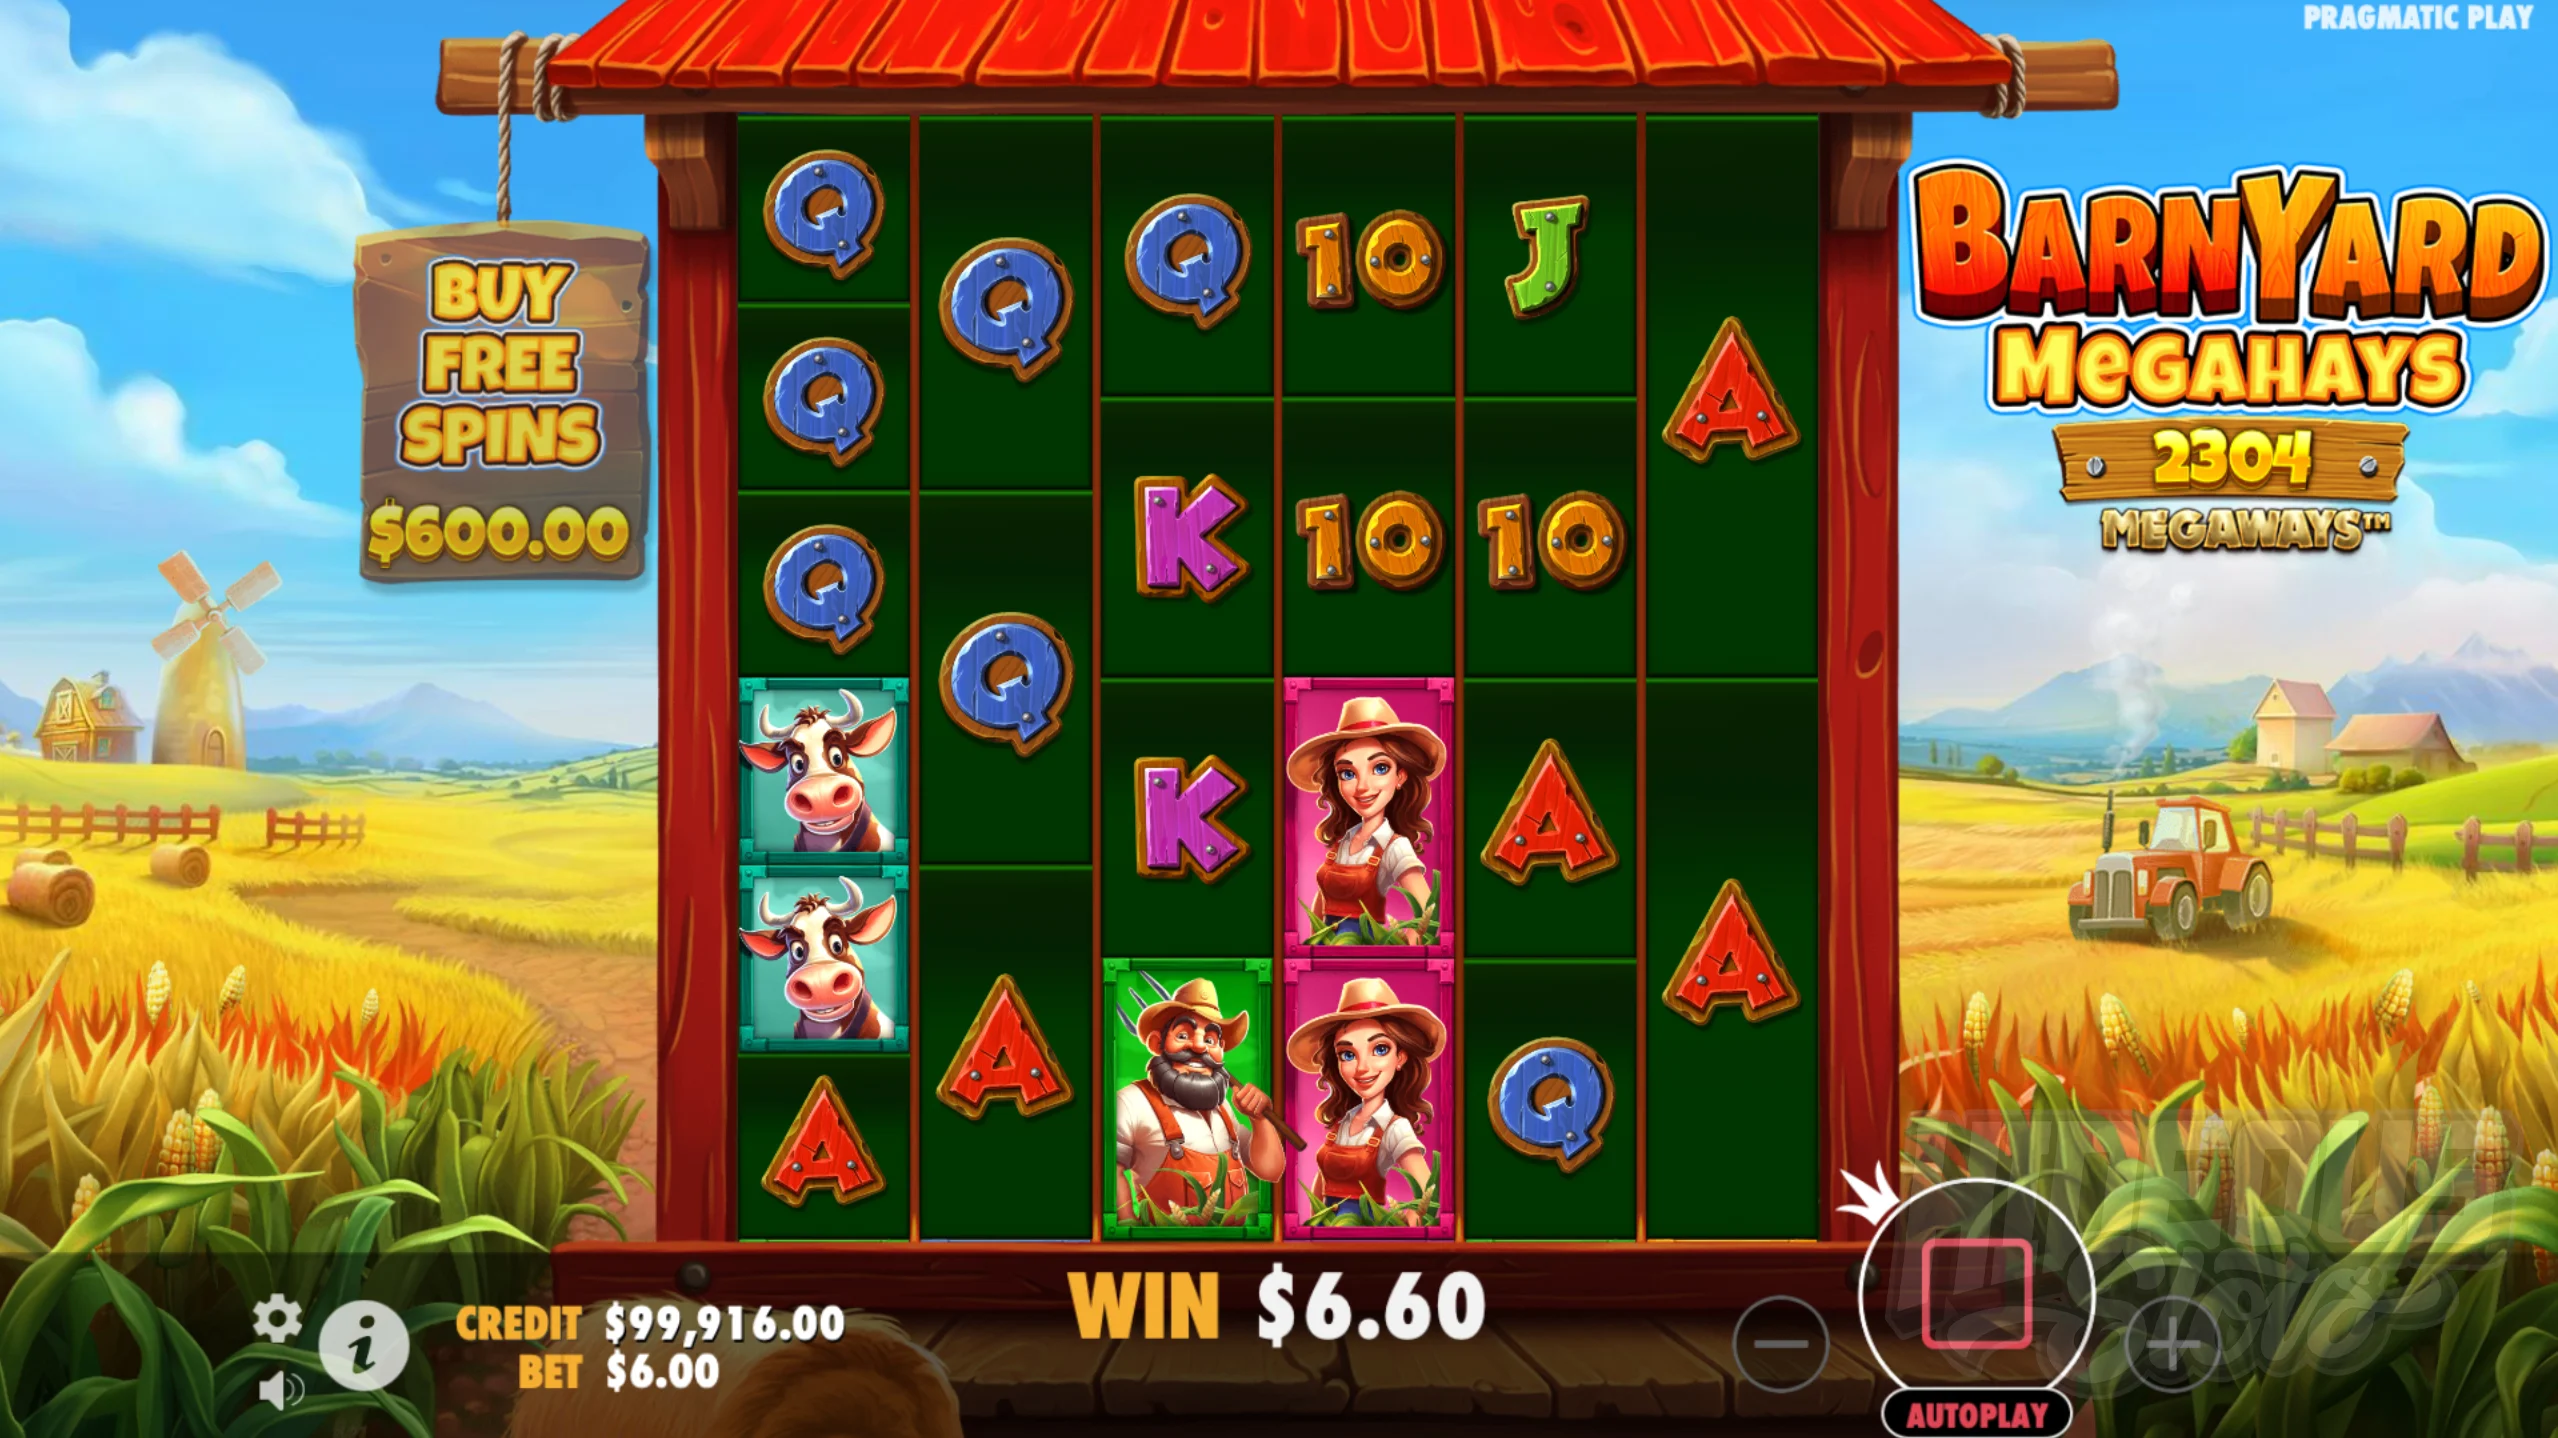 Barnyard Megahays Megaways Offers Players up to 117,649 Ways to Win